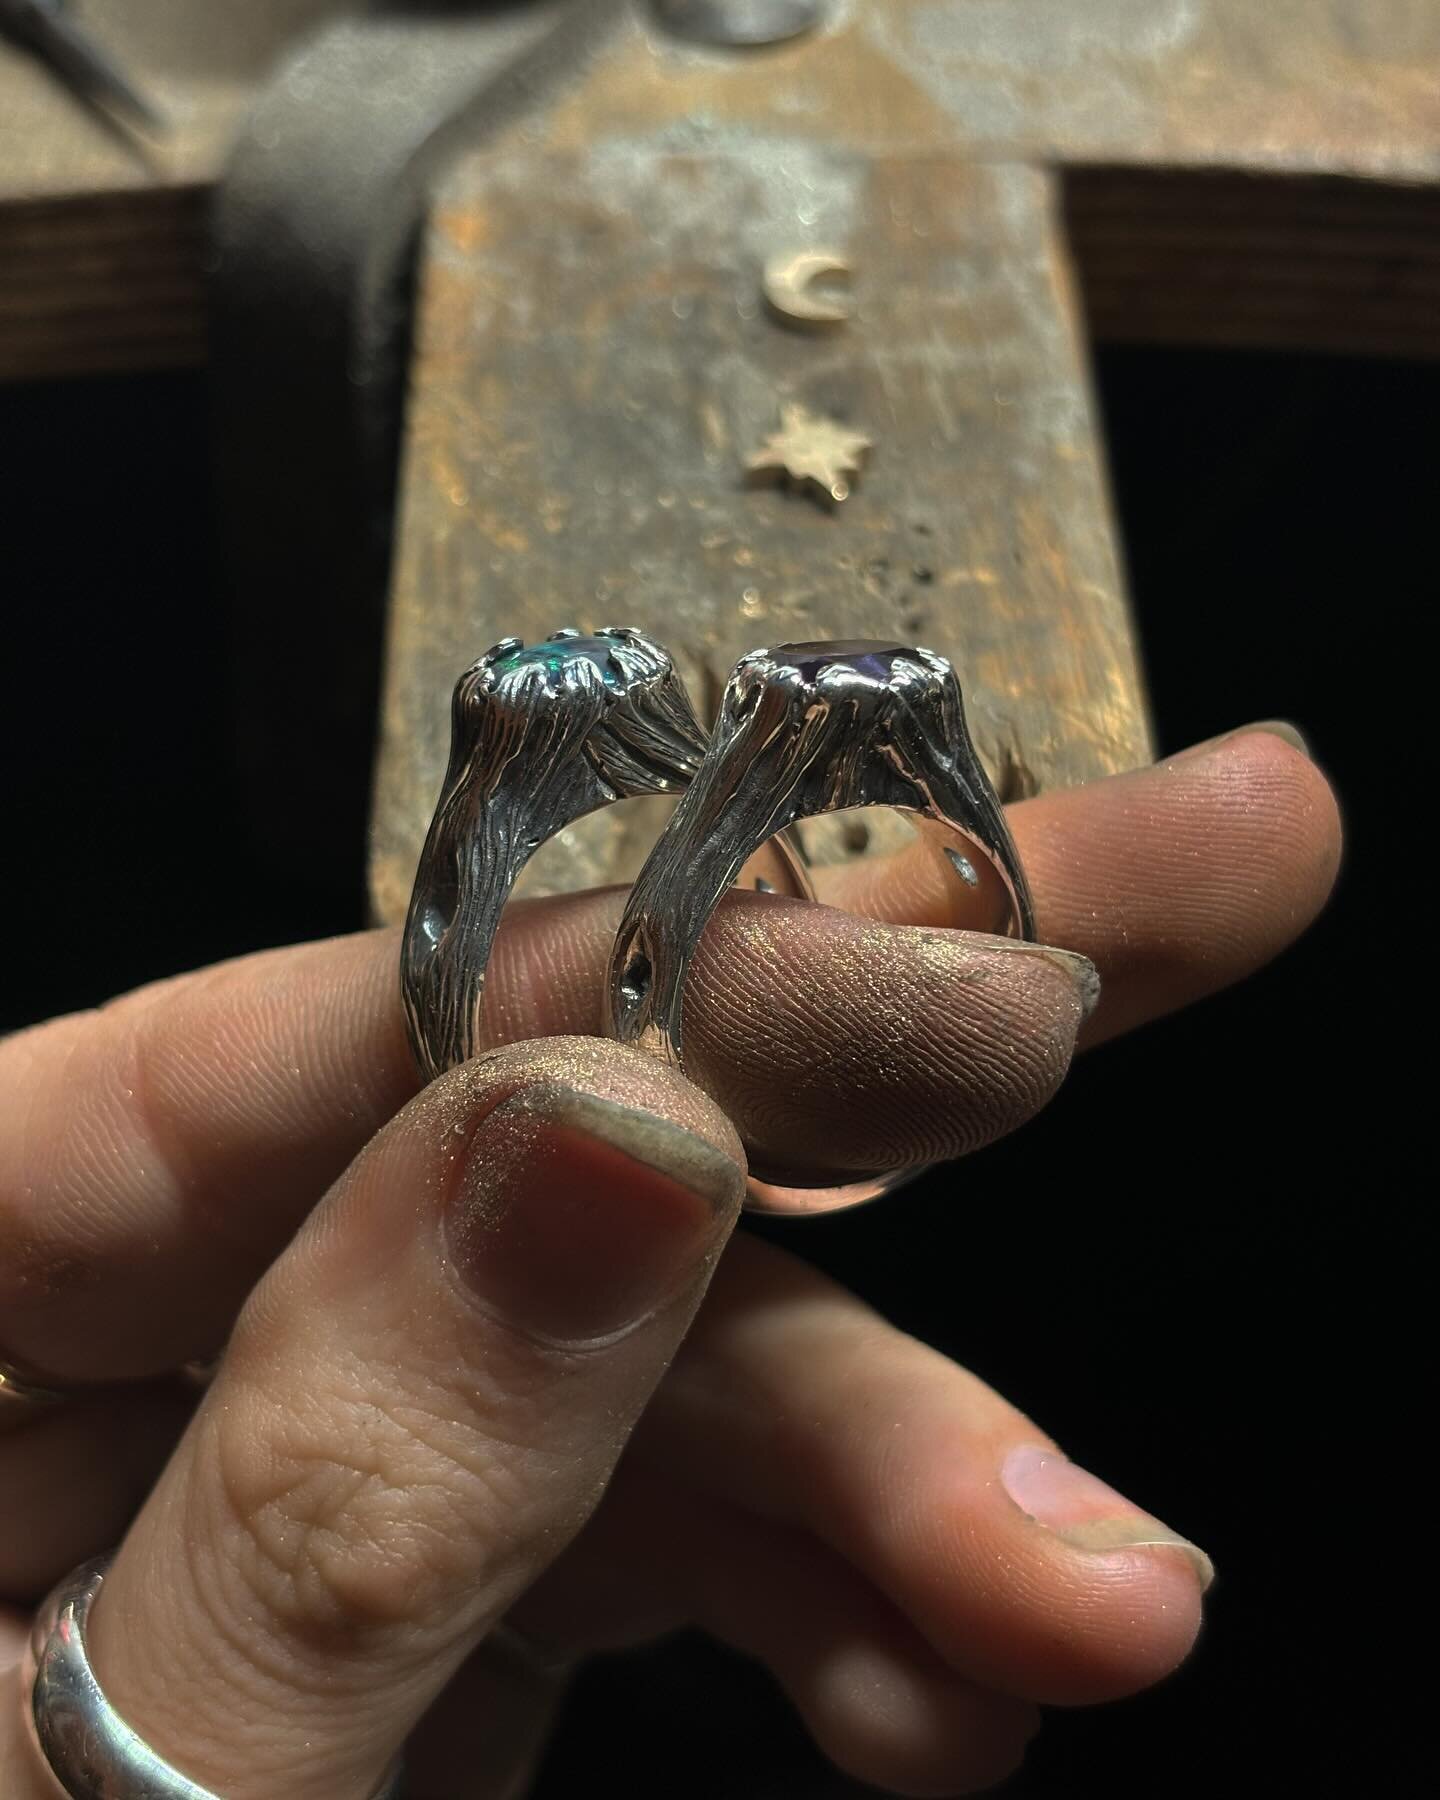 Two new kelp rings coming up. 🐋

I love having orders for pieces I&rsquo;ve already created, these two orders are for the kelp ring (originally part of my &lsquo;Power of Plants&rsquo; collection). 

I created the original kelp ring by carving it fr